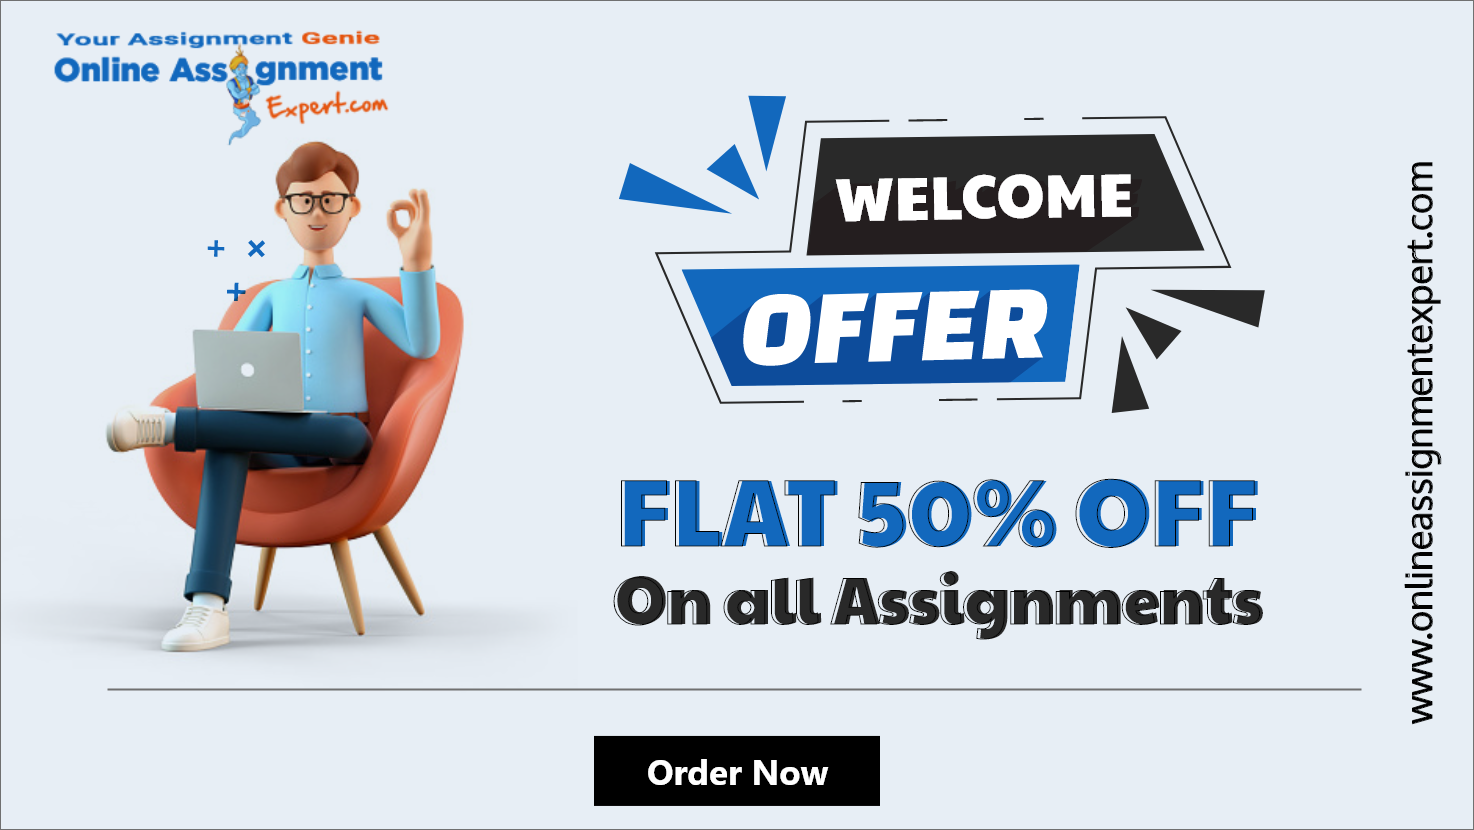 Avail FLAT 50% OFF on All Assignments